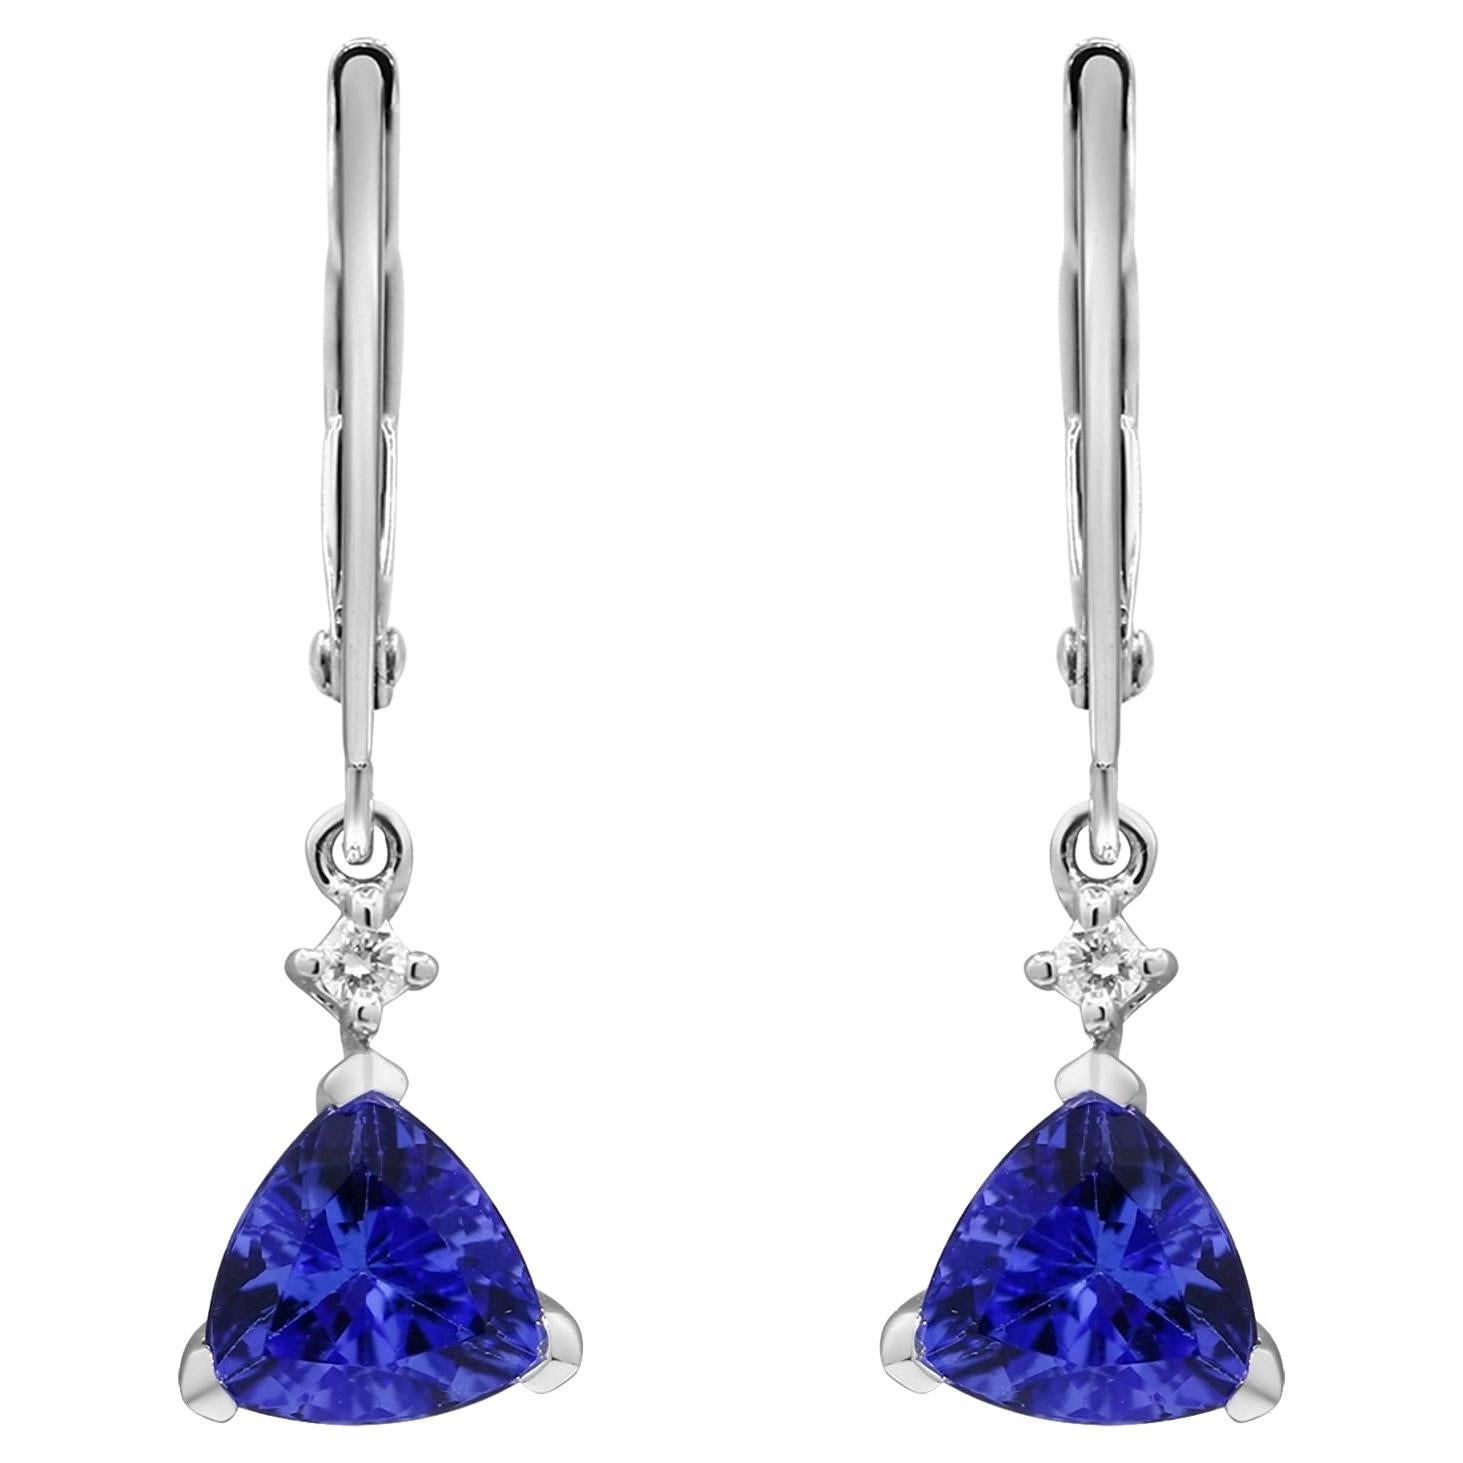 1.13 carat Trillion-cut Tanzanite With Diamond accents 14K White Gold Earring.